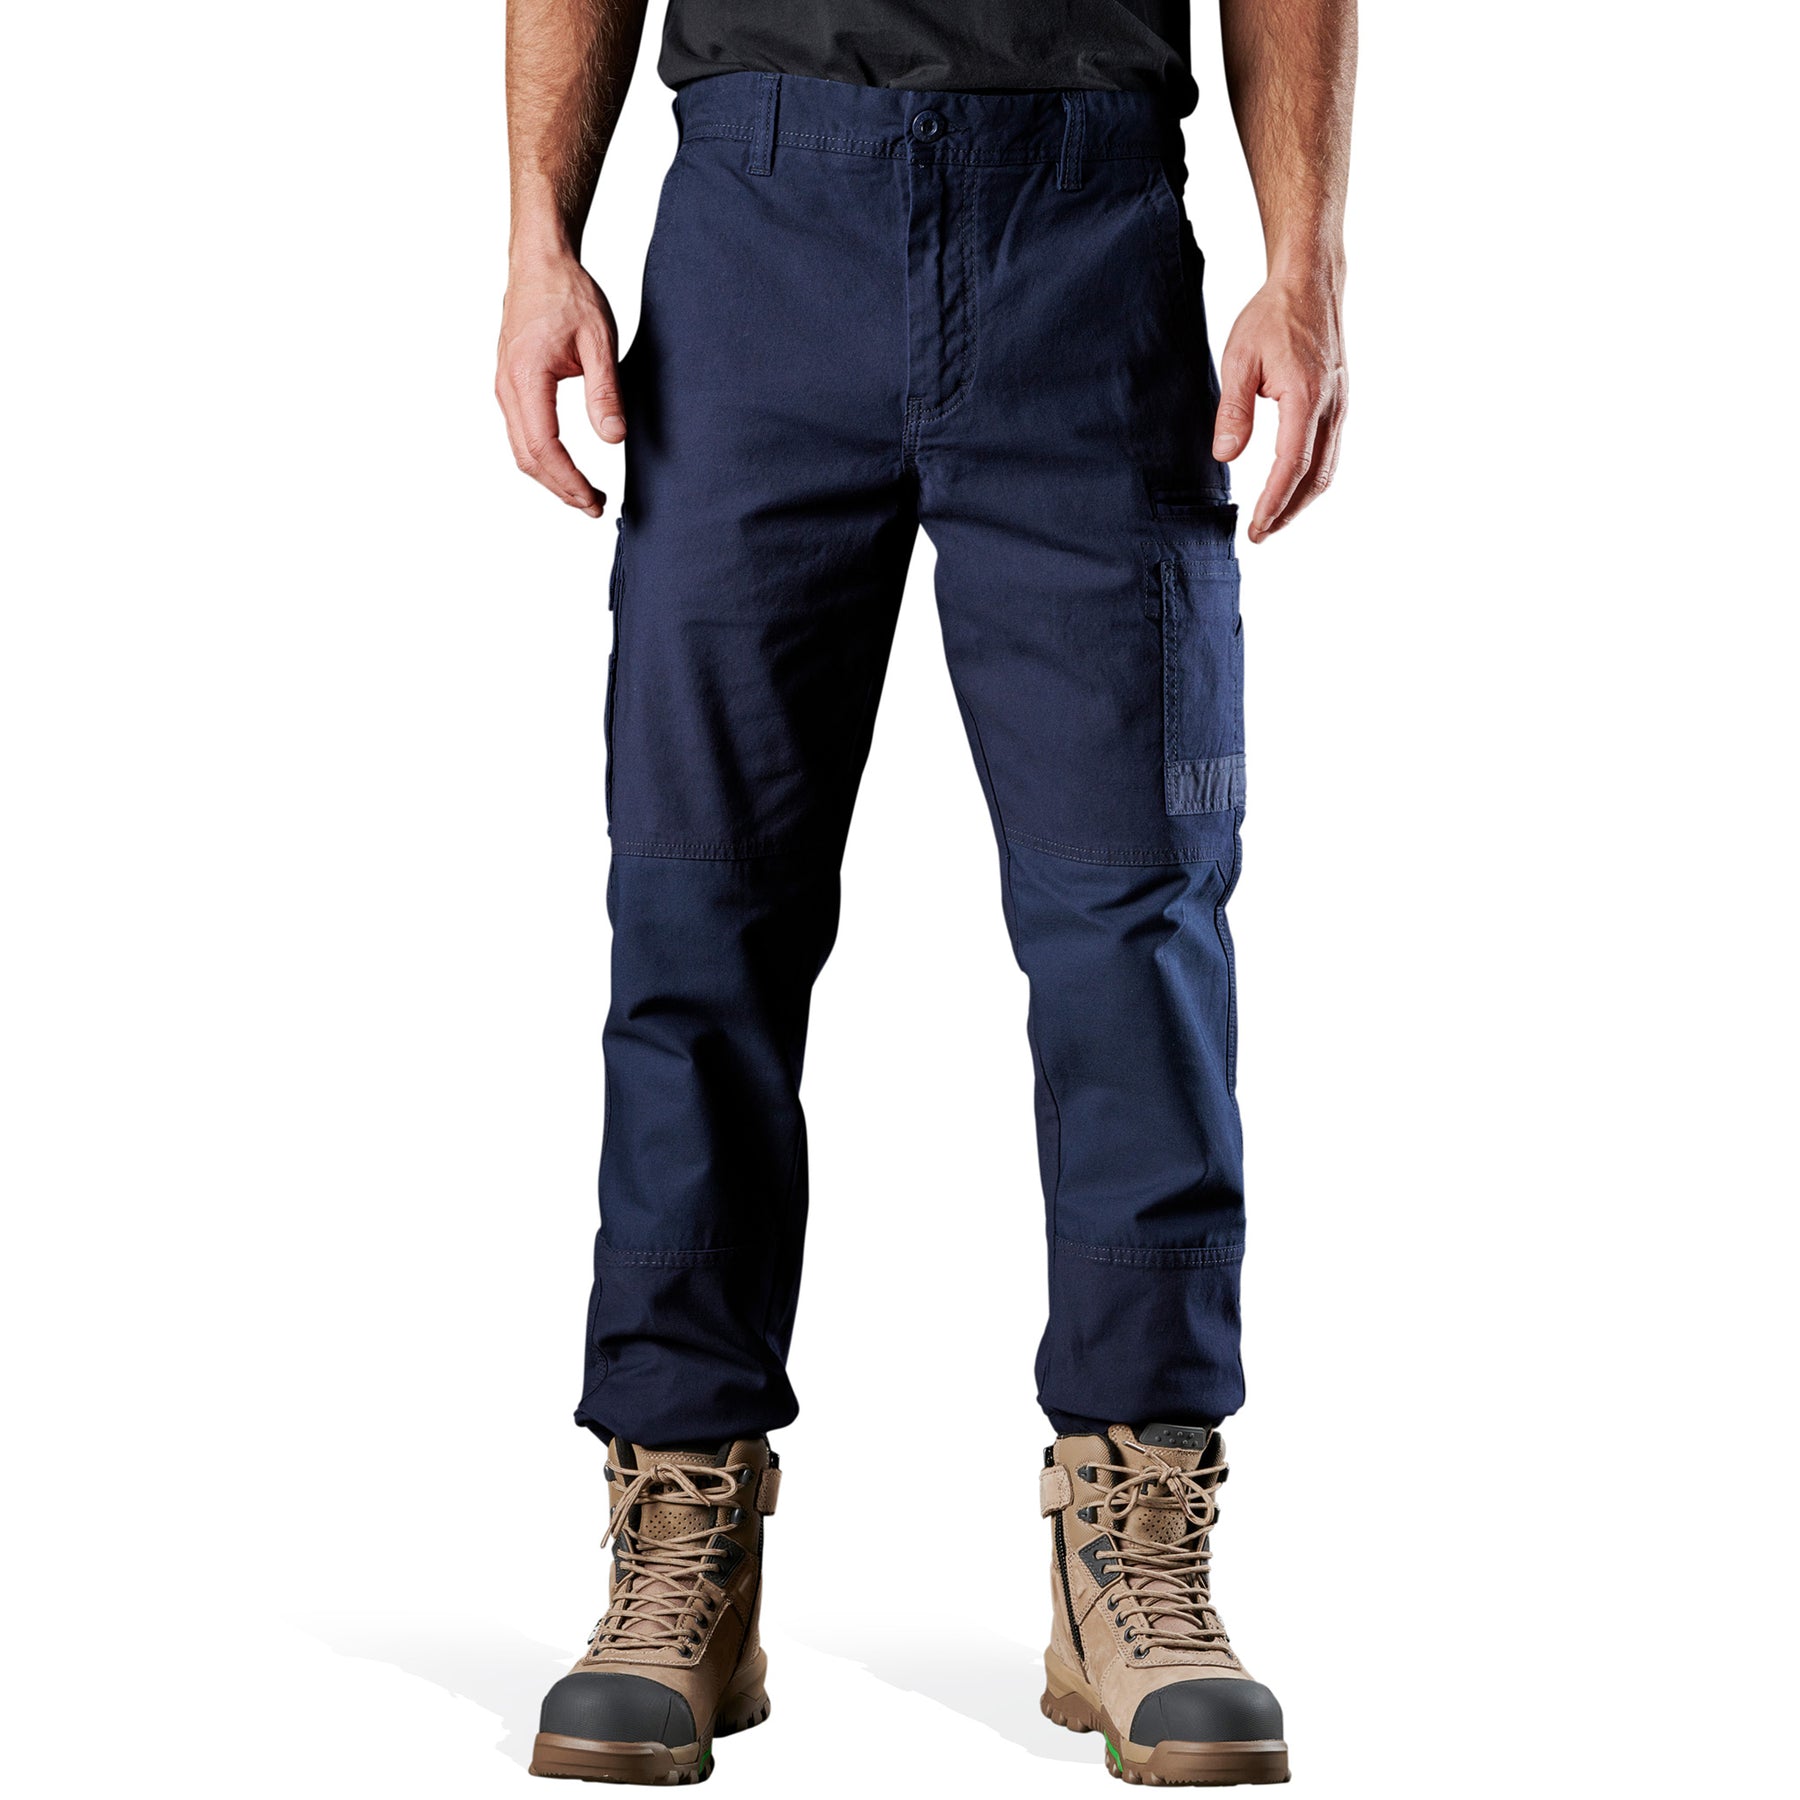 fxd stretch work pants in navy